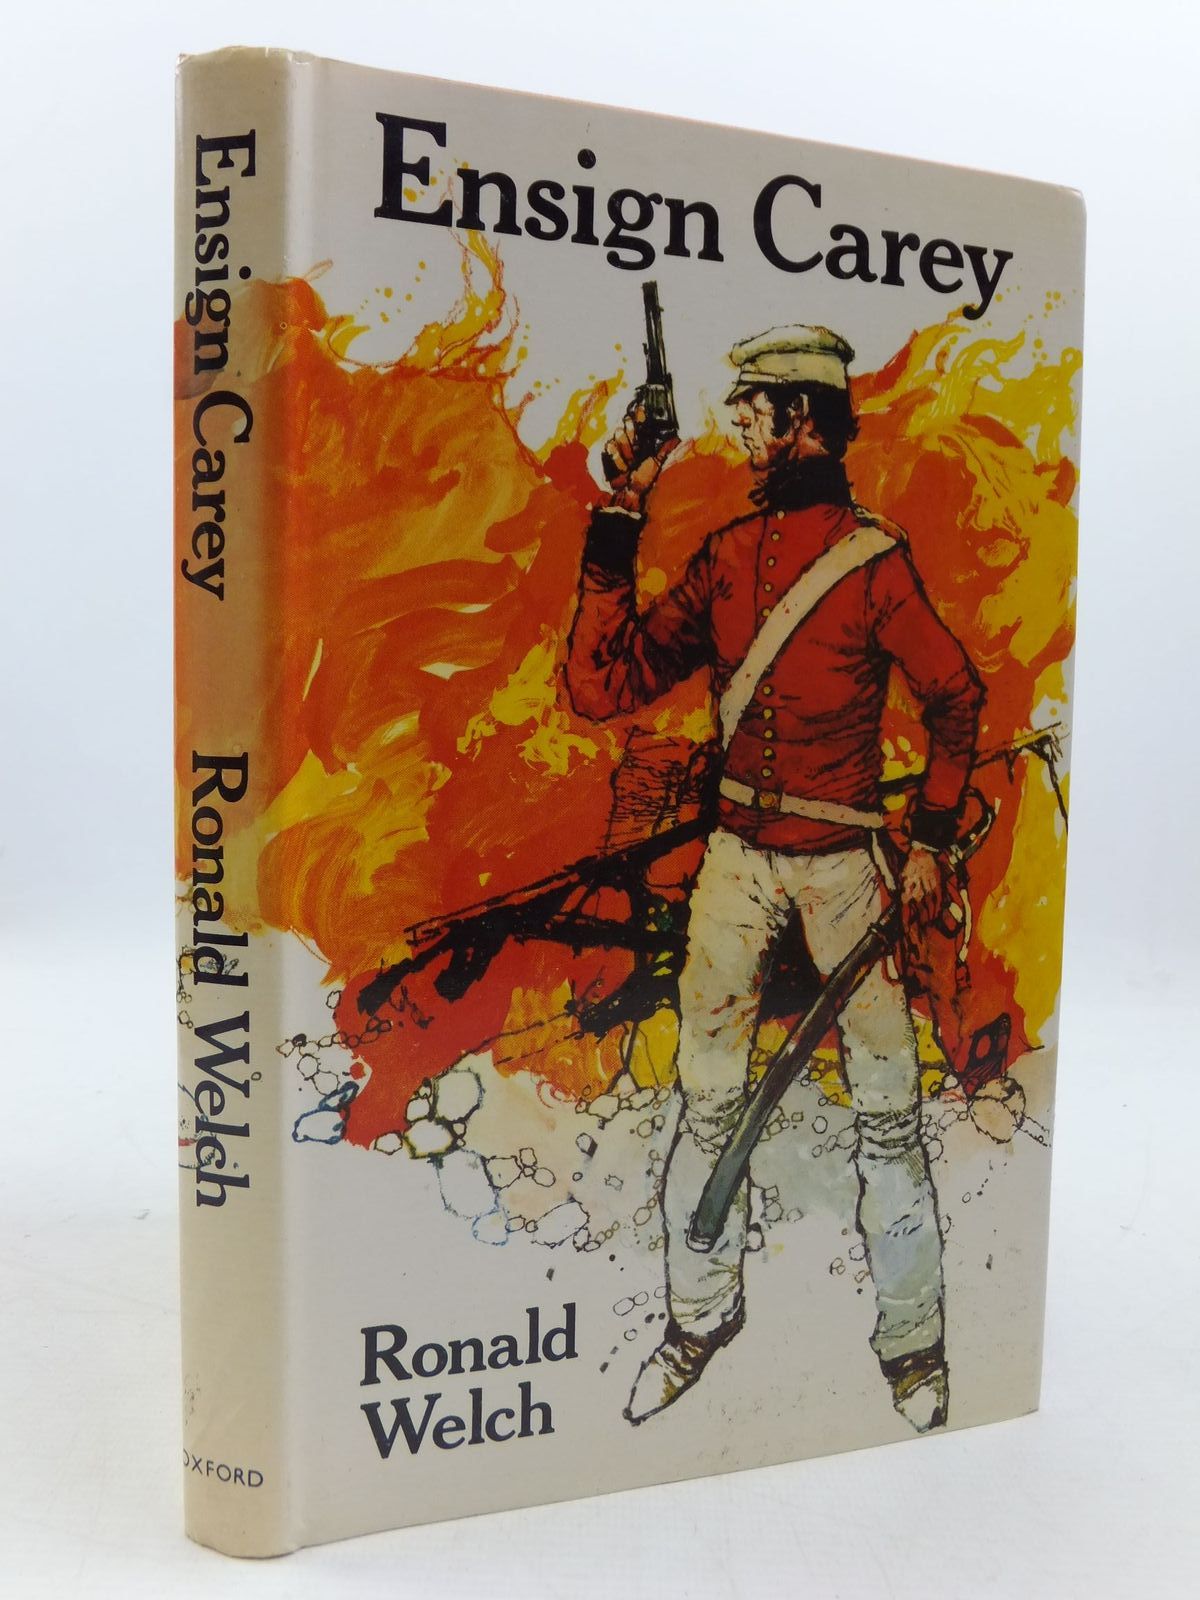 Cover of ENSIGN CAREY by Ronald Welch